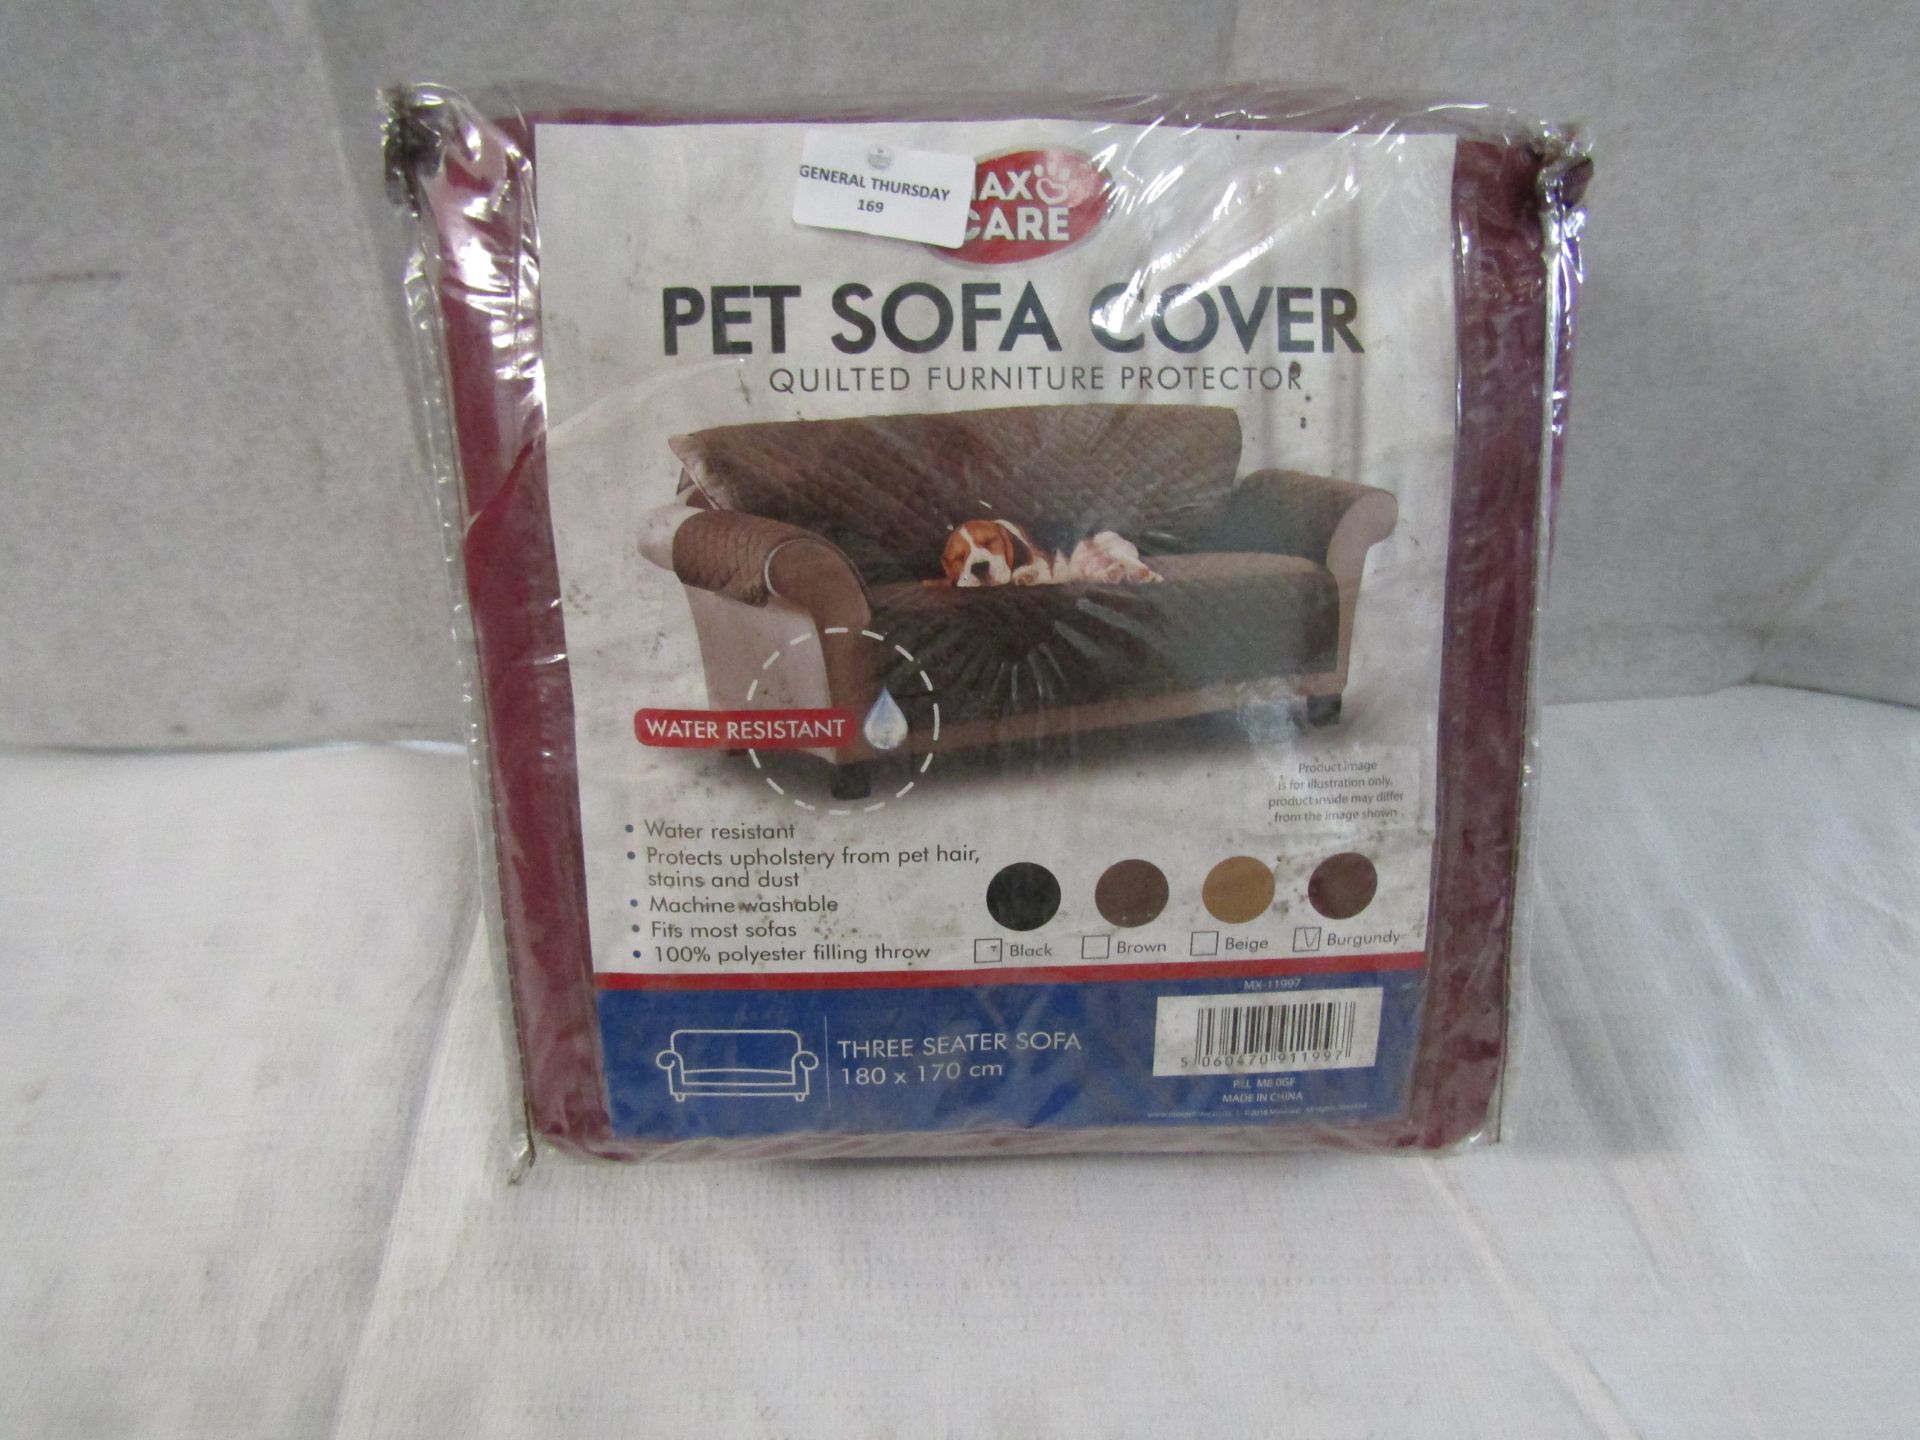 MaxiCare - Burgundy 3-Seater Quilted Pet Sofa Cover 180x170cm - Packaged.